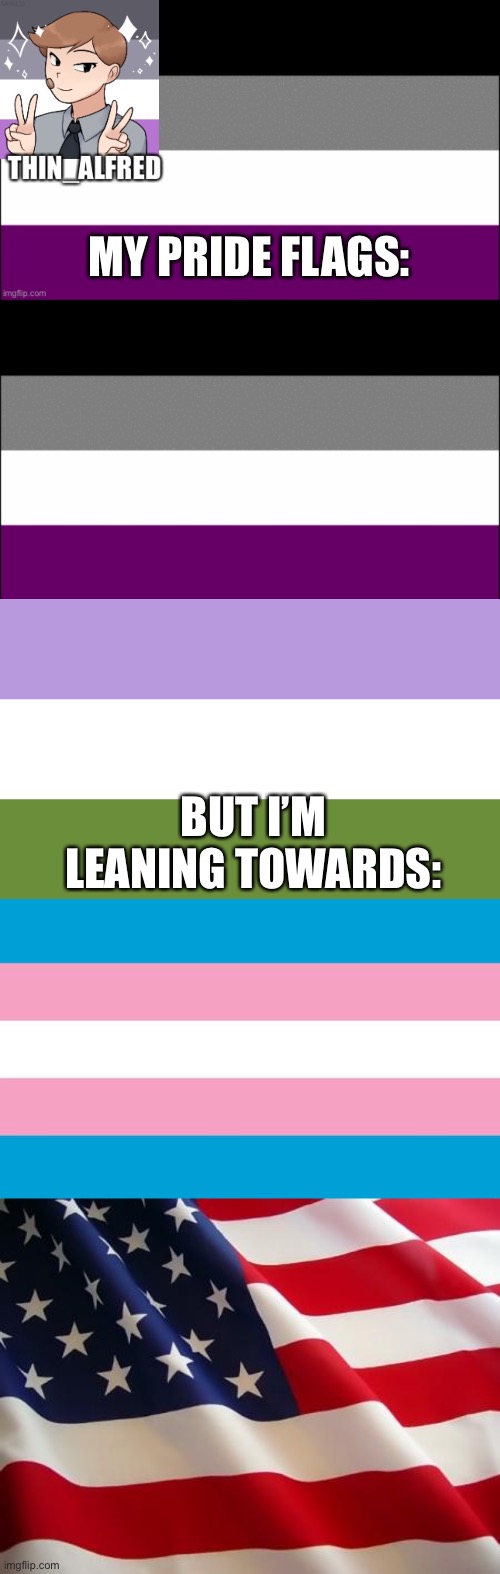 MY PRIDE FLAGS:; BUT I’M LEANING TOWARDS: | image tagged in thin_alfred announcement board,ace flag,transgender flag,american flag,genderqueer flag | made w/ Imgflip meme maker